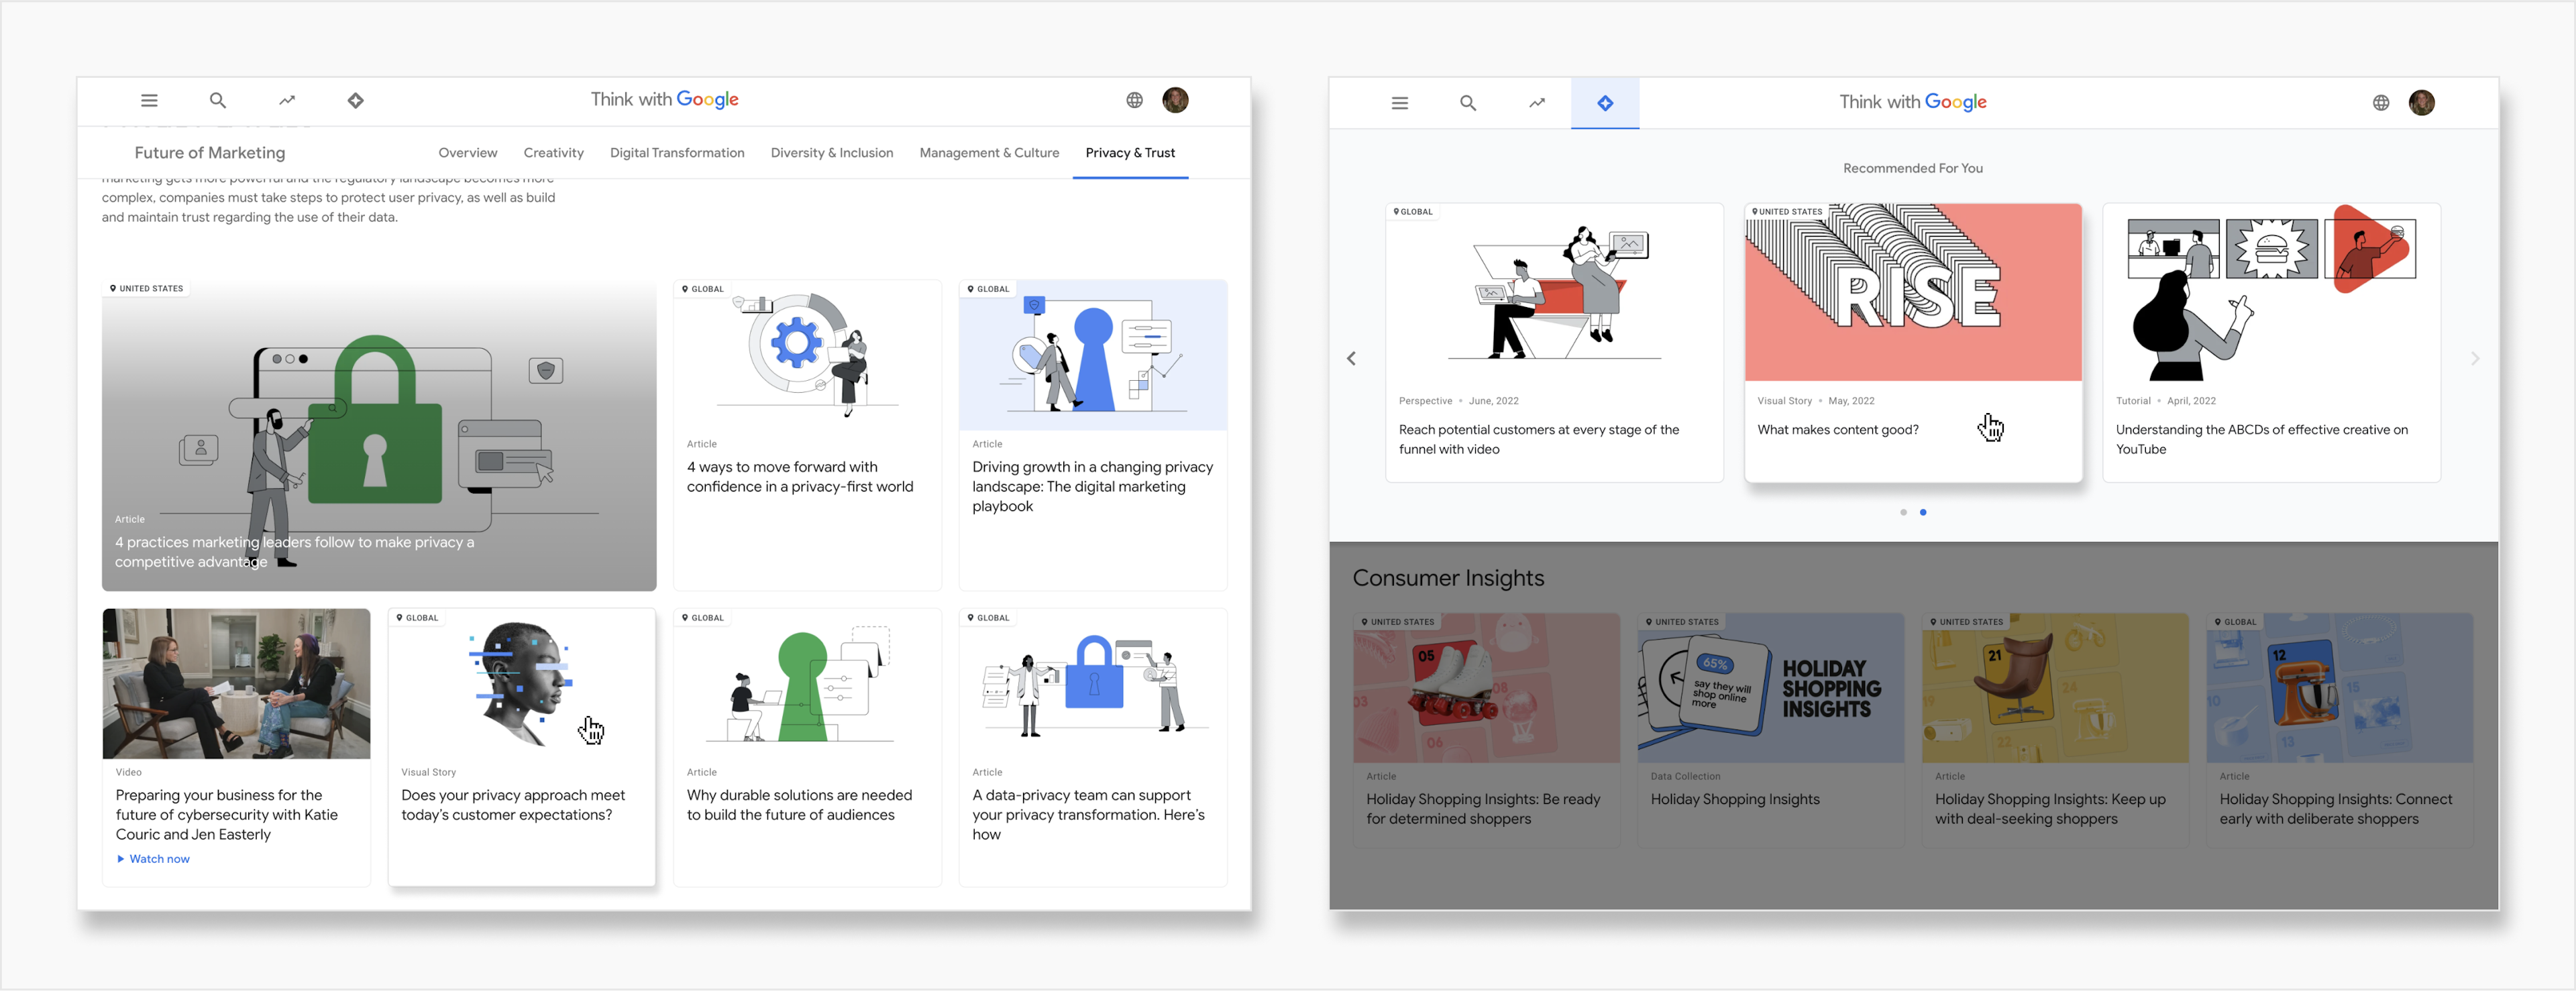 We later integrated Visual Stories into the core Think with Google platform as a content type, alongside standard articles, videos, and more.